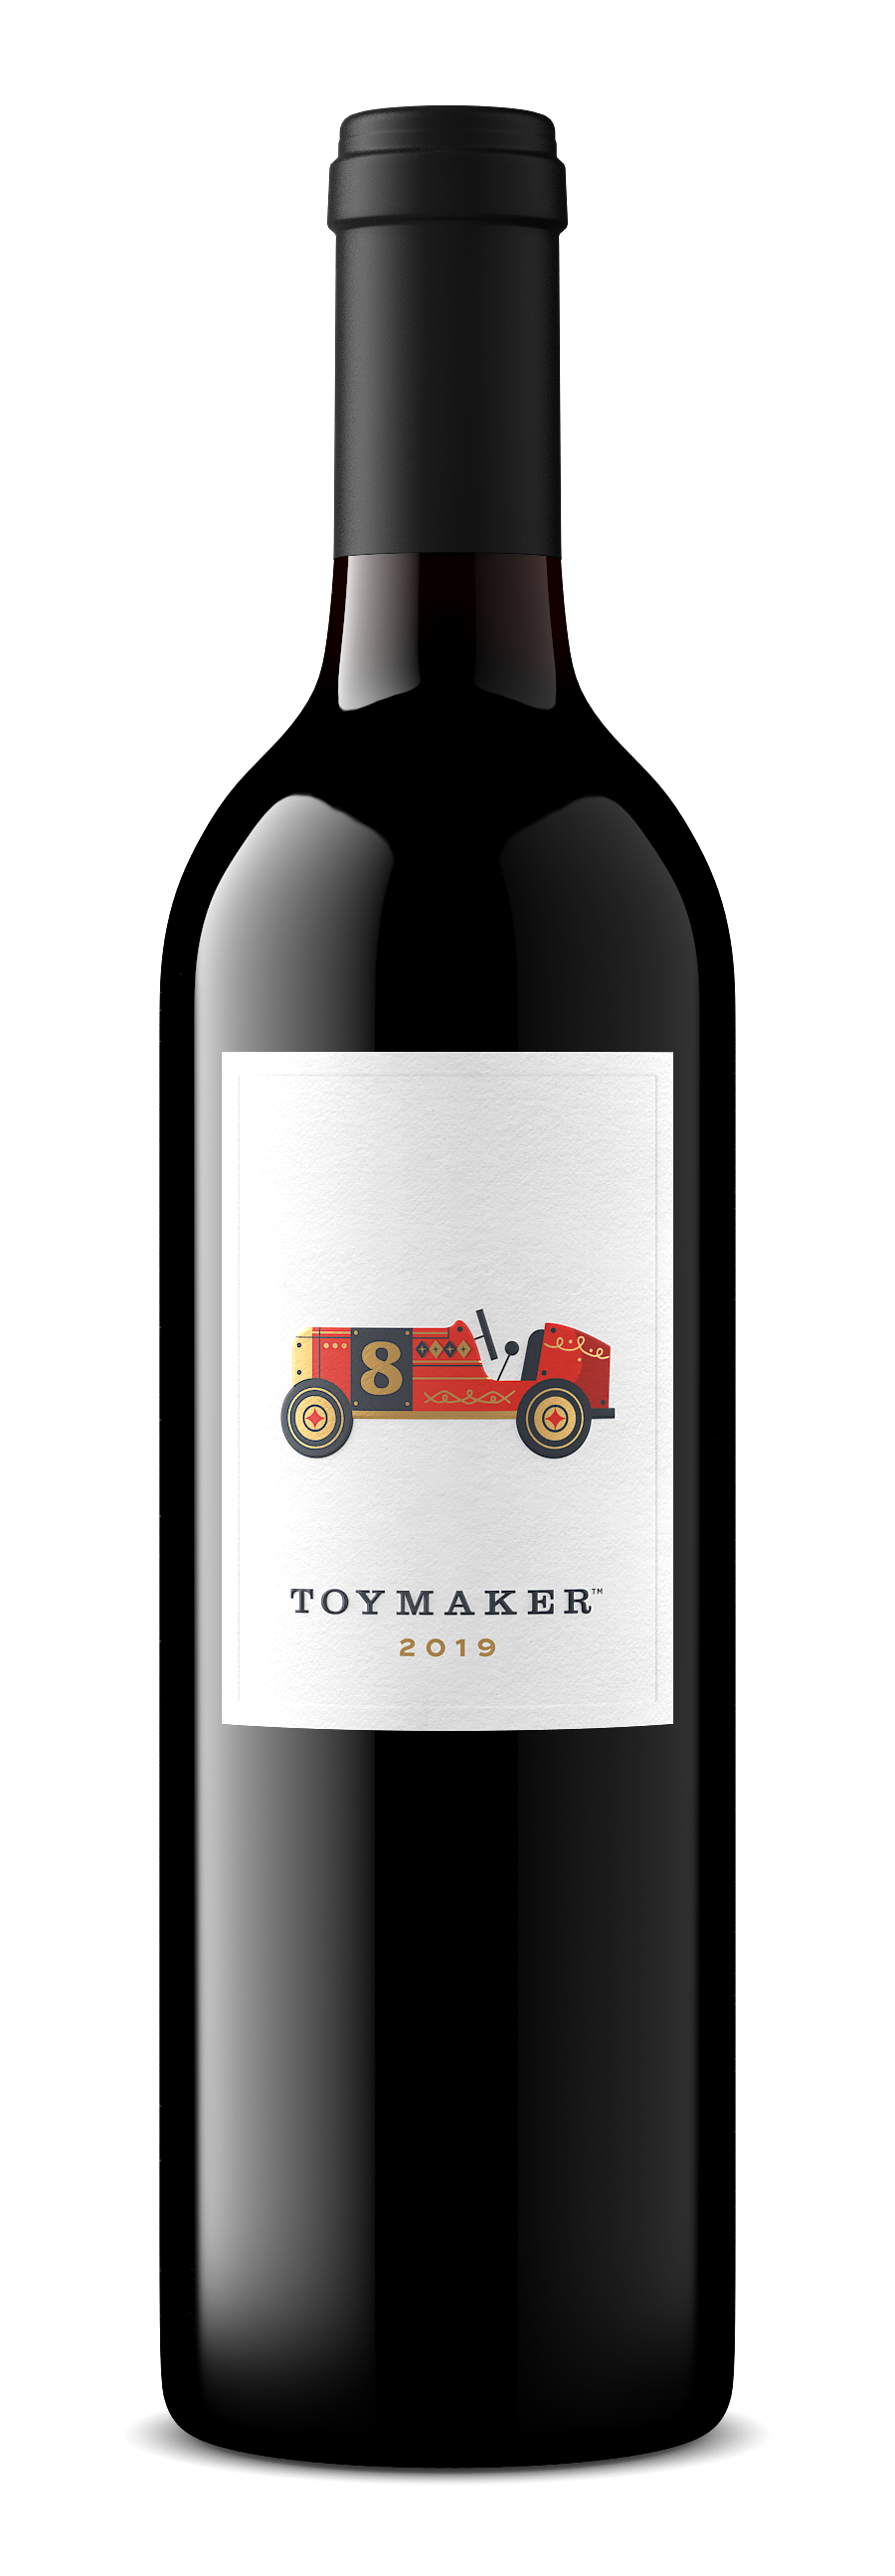 2018 Toymaker Cellars Cabernet Sauvignon Napa Valley Red Wine Label with Toy Train label, made by Napa Valley winemaker Martha McClellan. Rare & limited Grand Cru Napa Valley Cabernet Sauvignon. Made by Martha McClellan, Martha McClellan, Martha McClellan, Martha McClellan, Martha McClellan, Martha McClellan, Martha McClellan, Martha McClellan, Martha McClellan, Martha McClellan, Martha McClellan